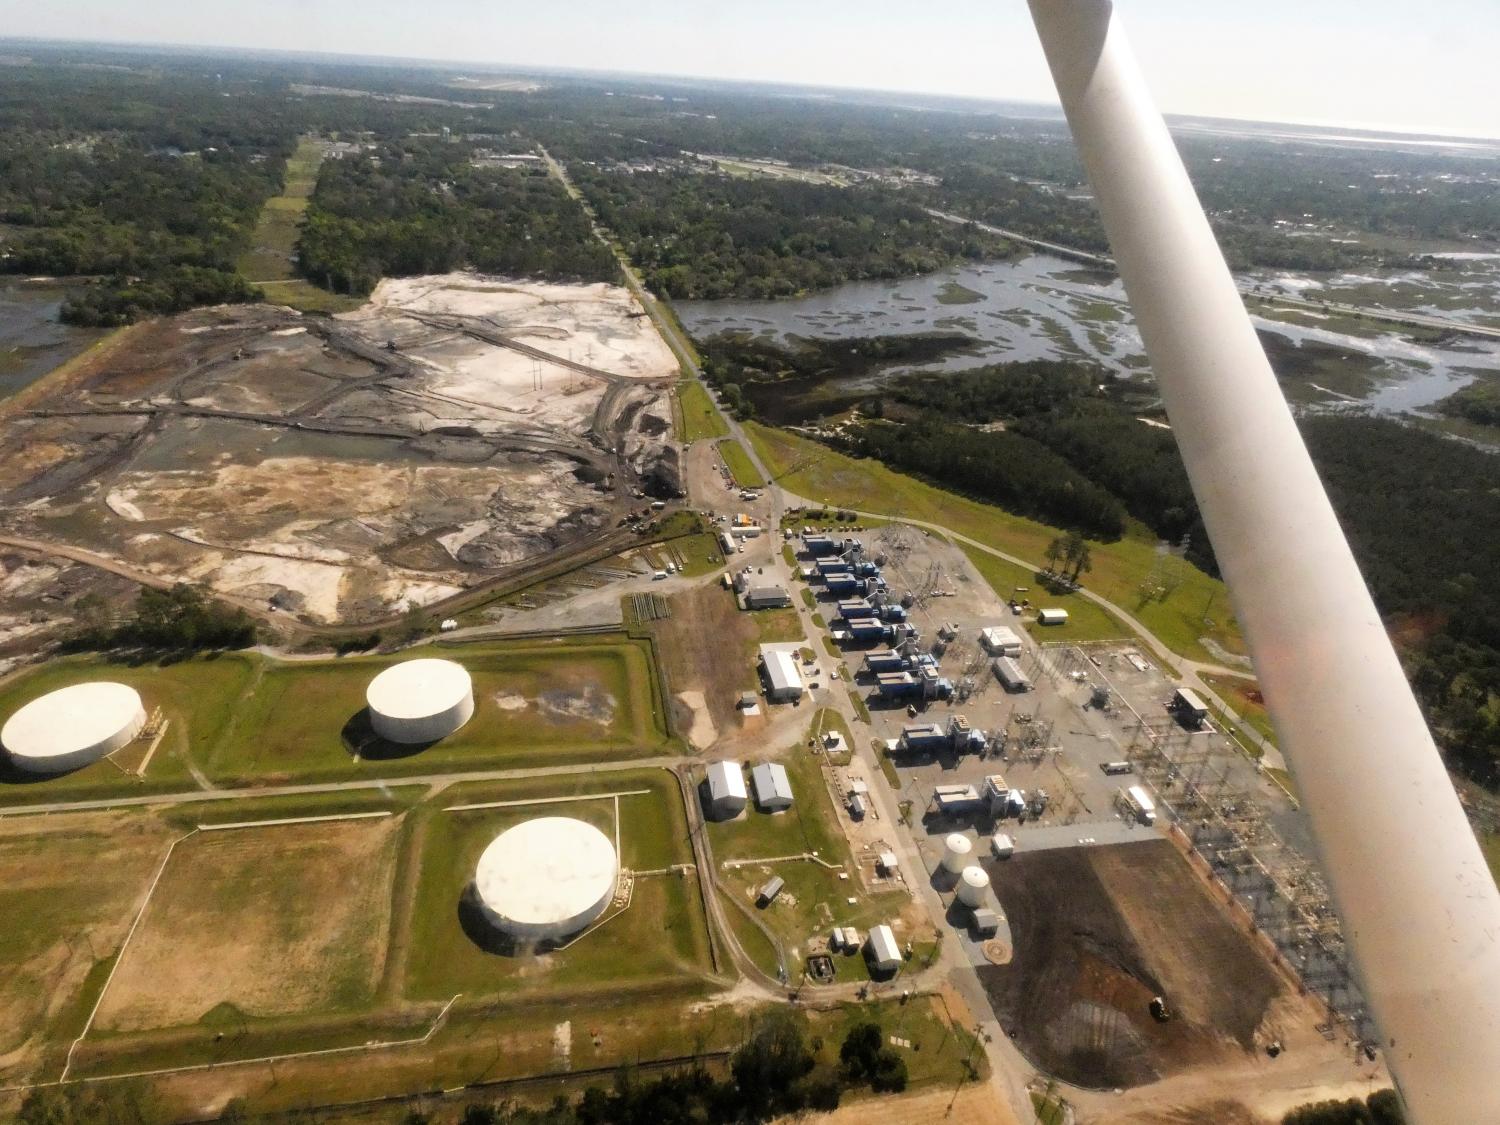 The impact that coal ash disposal has on groundwater supplies provides the businesses community with yet another reason to demand safer, more sustainable sources of electricity from their local utilities.